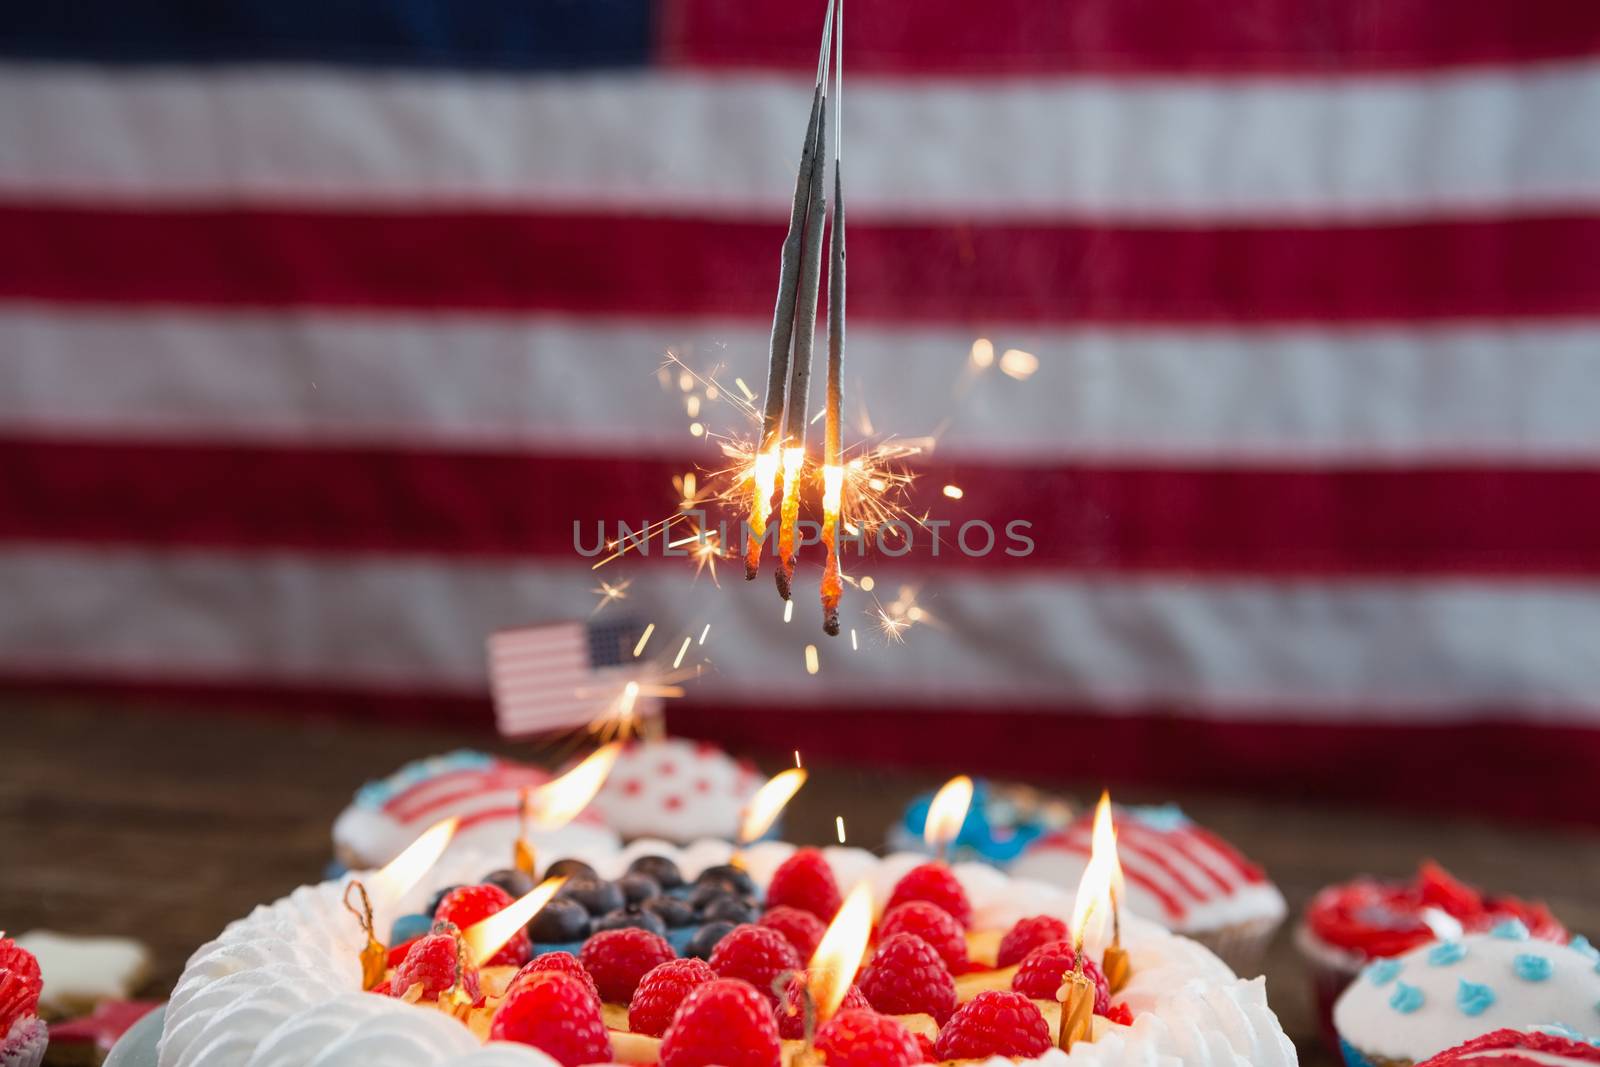 Patriotic 4th of july cake and cupcake by Wavebreakmedia